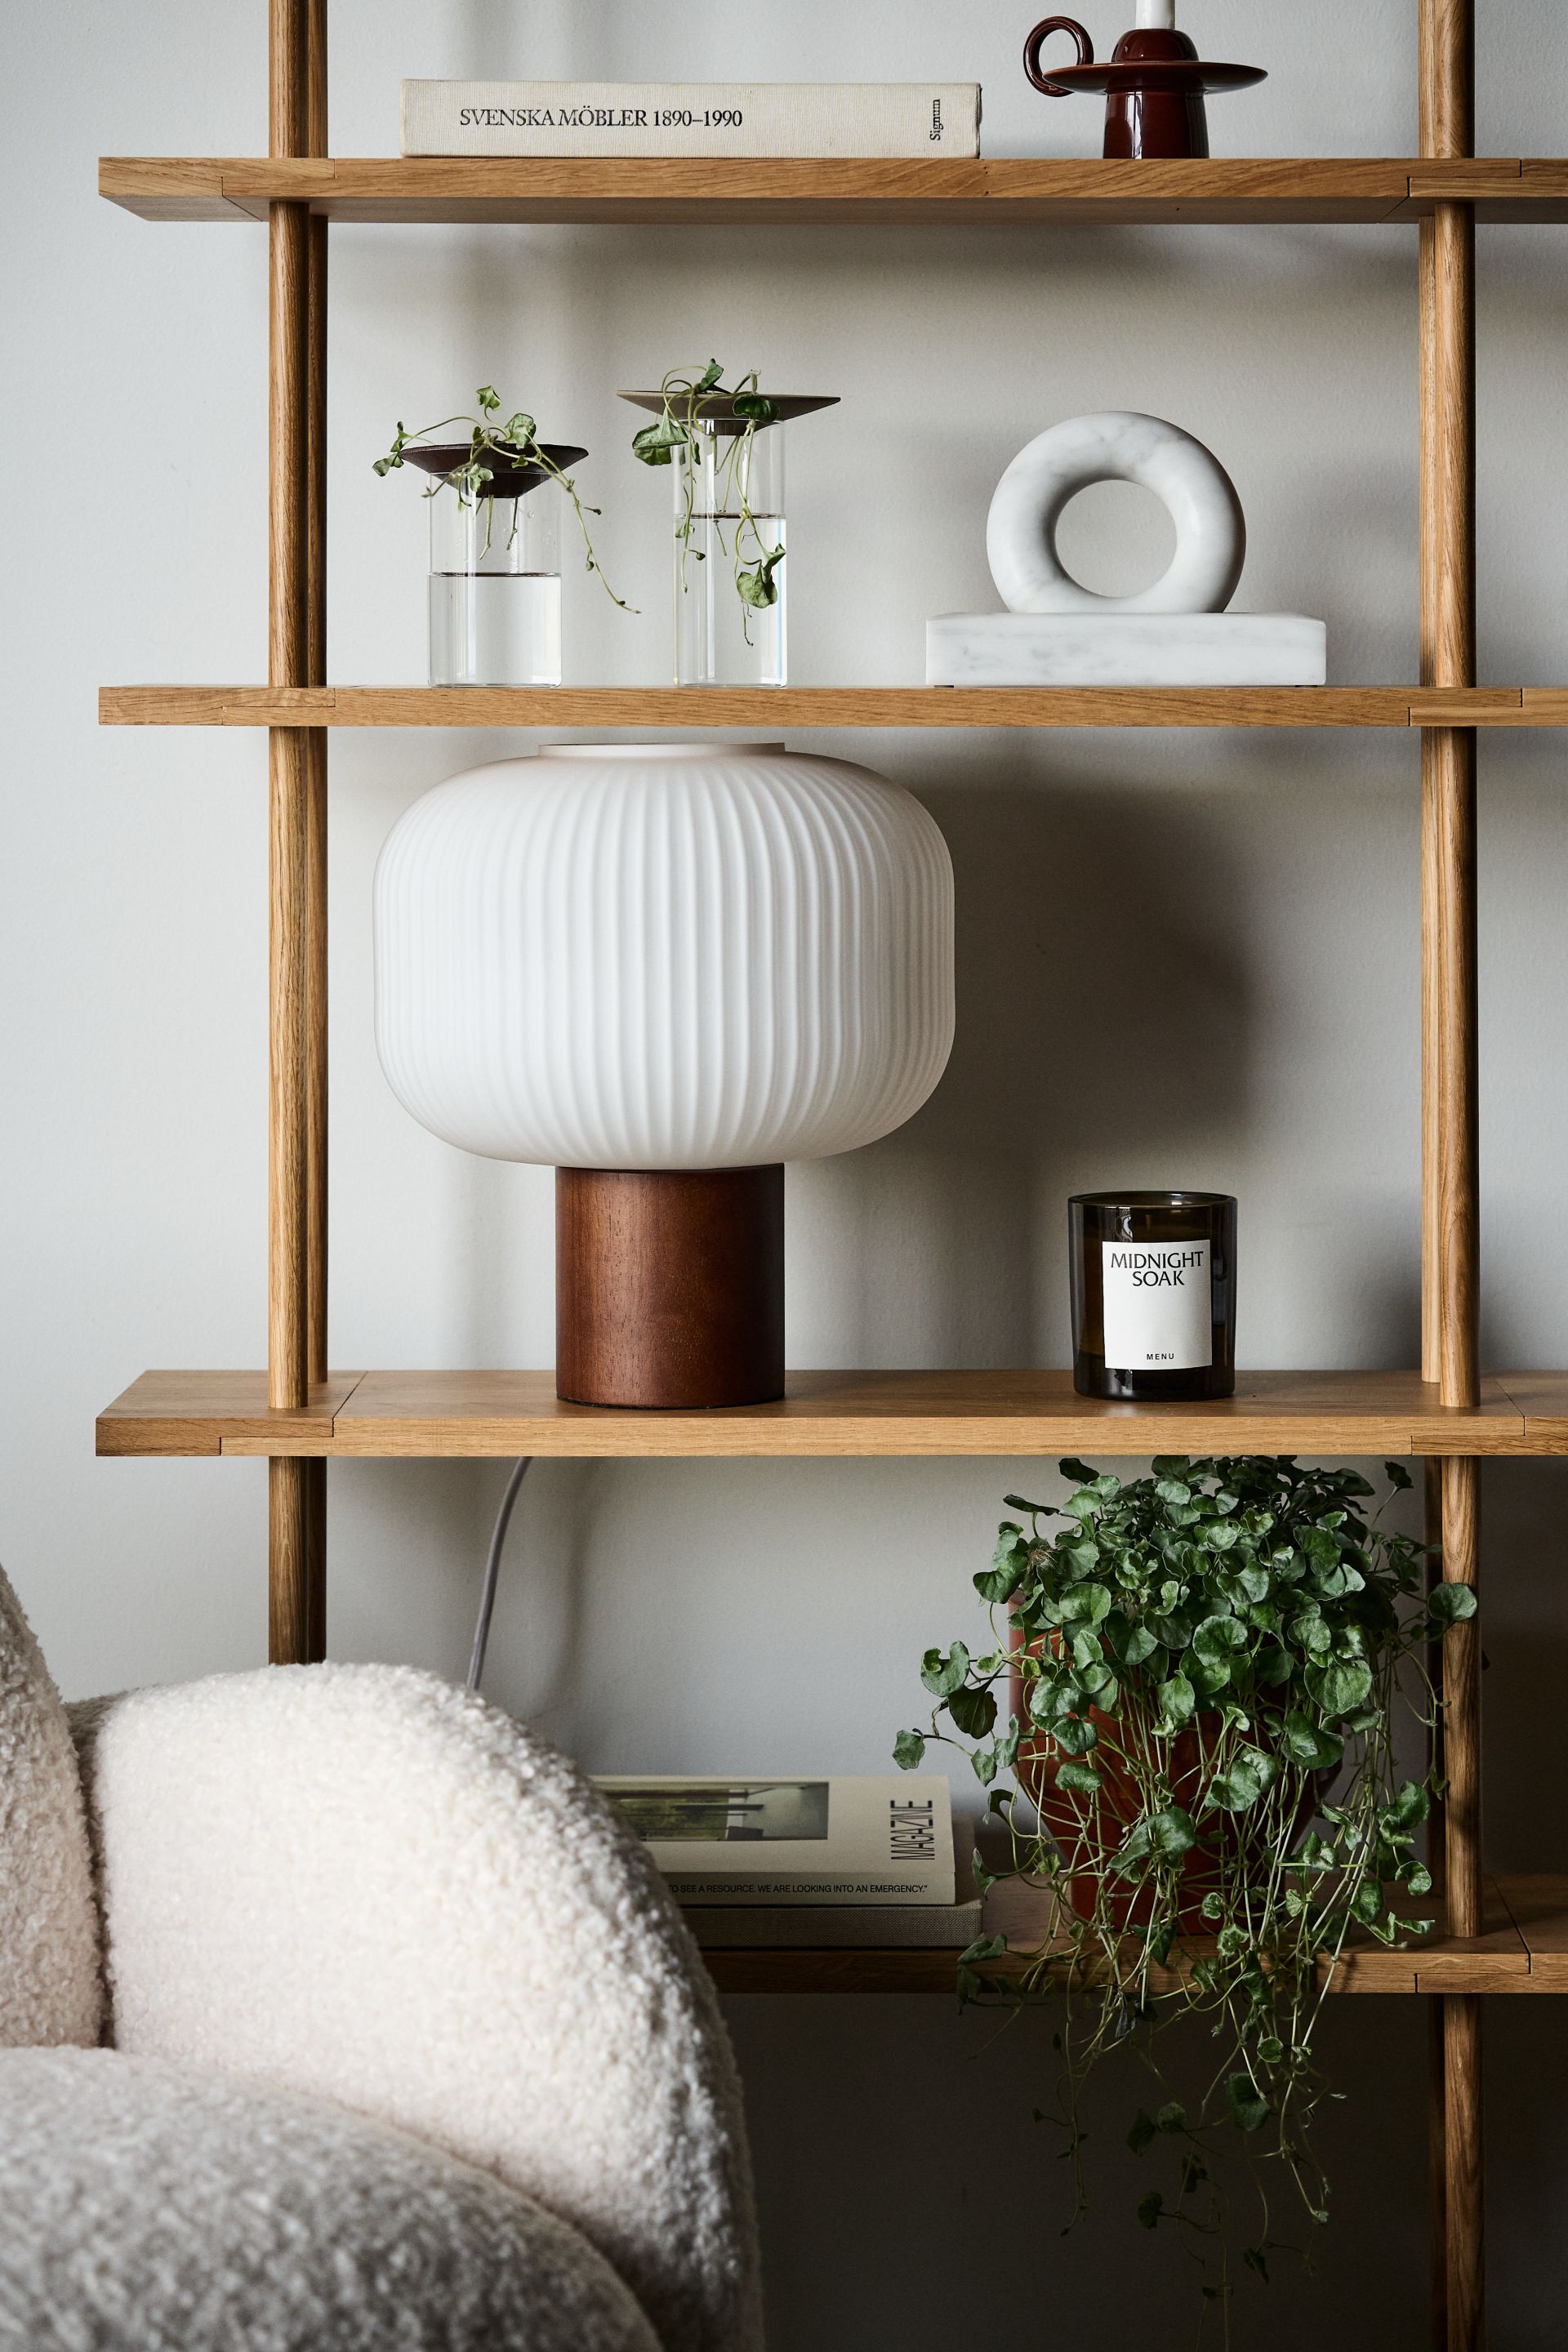 Walnut and Dark Woods Such as Dark Stained Oak Arending in 2024 Interiors. Here, the fair table lamp from scandi living with a ribbed diffuser and lamp base in dark stained Ash.